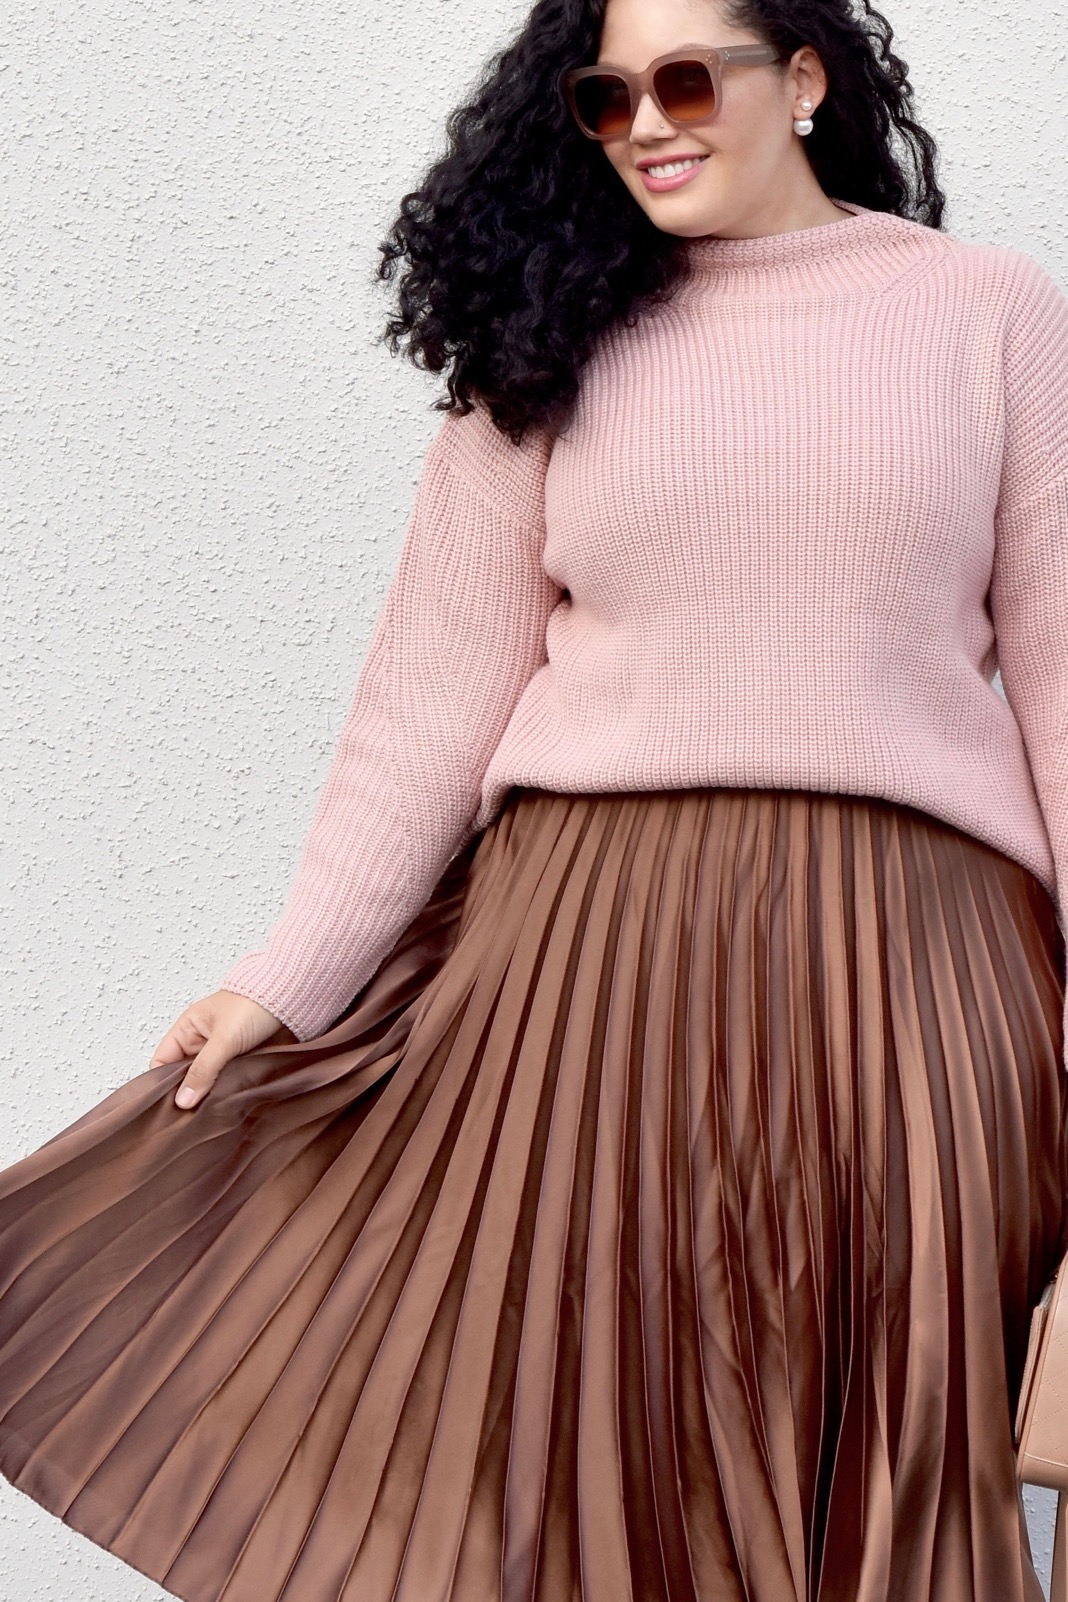 Trend to Try: The Satin Skirt by Girl With Curves